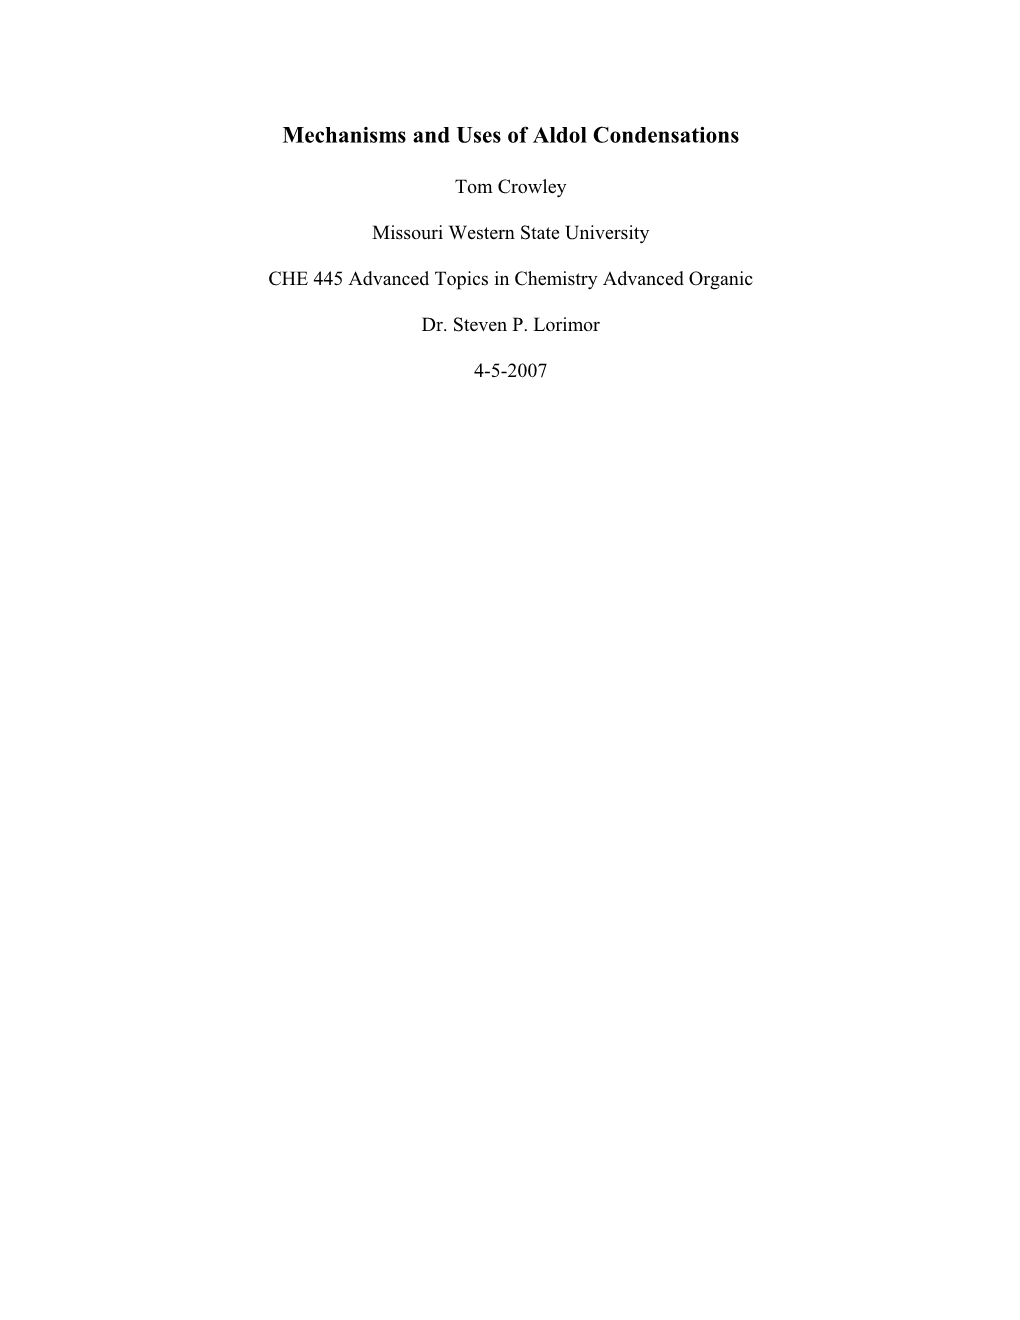 Mechanisms and Uses of Aldol Condensations